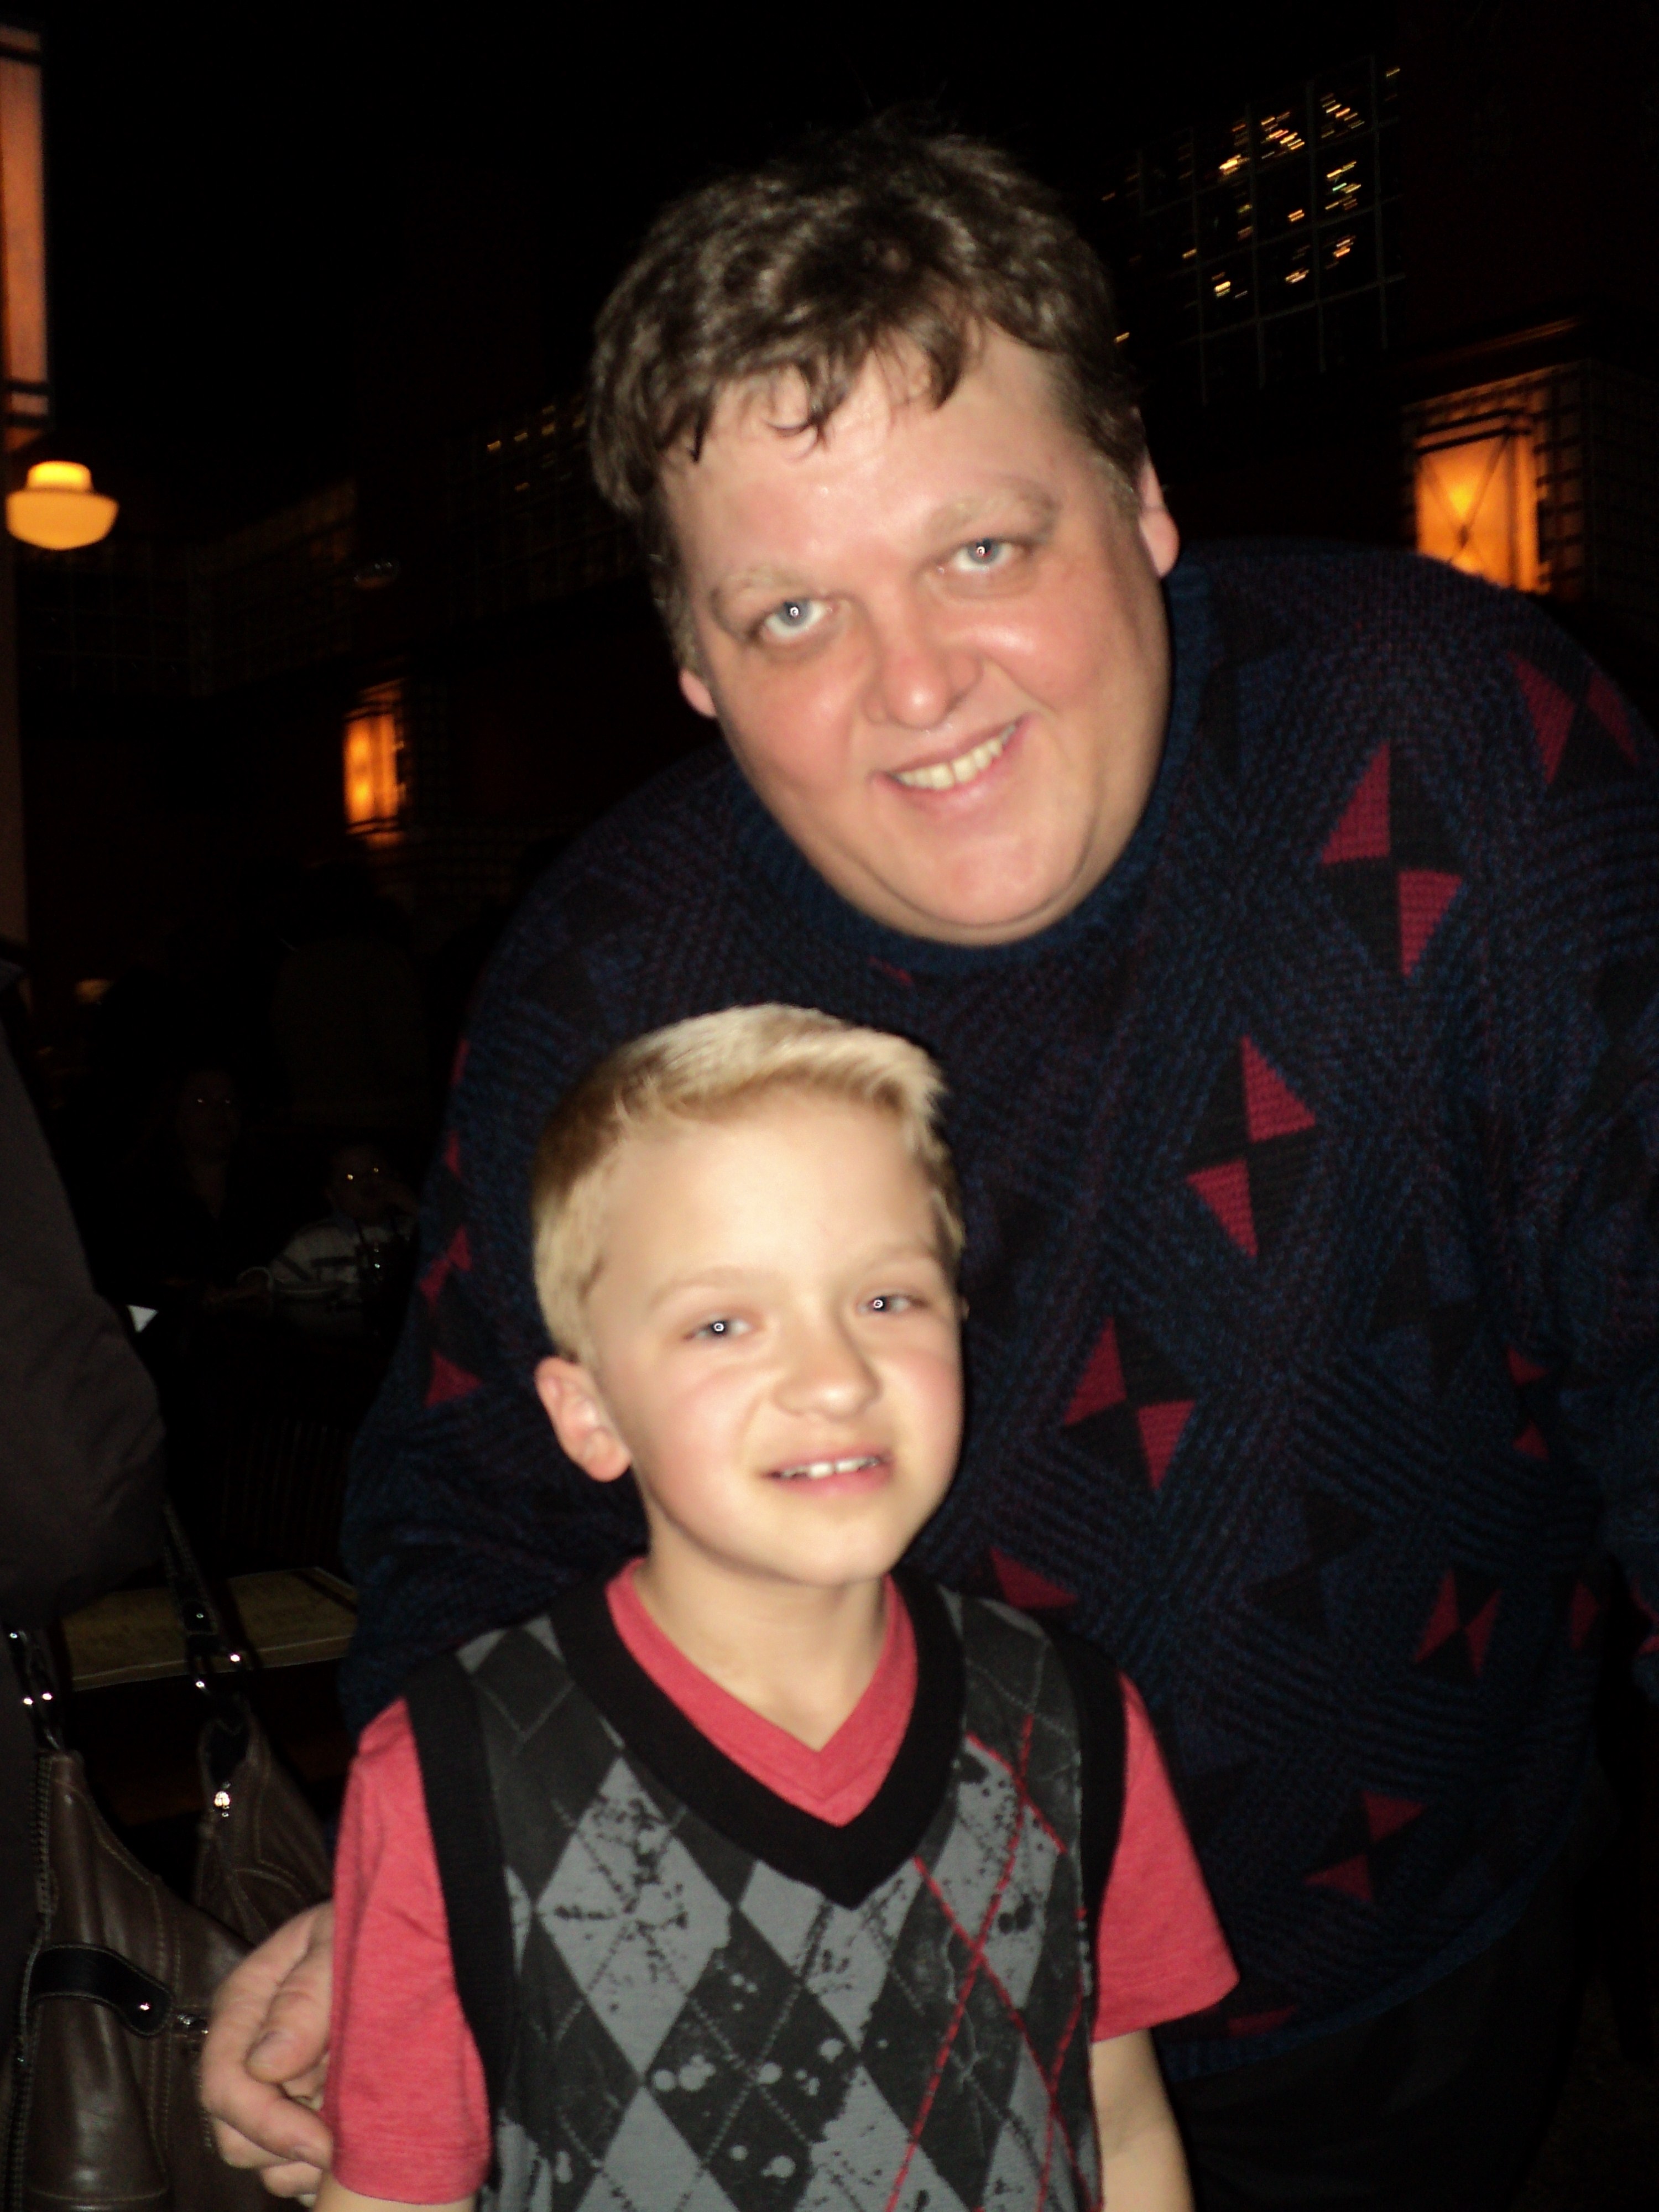 Ethan and his agent Curt Howe